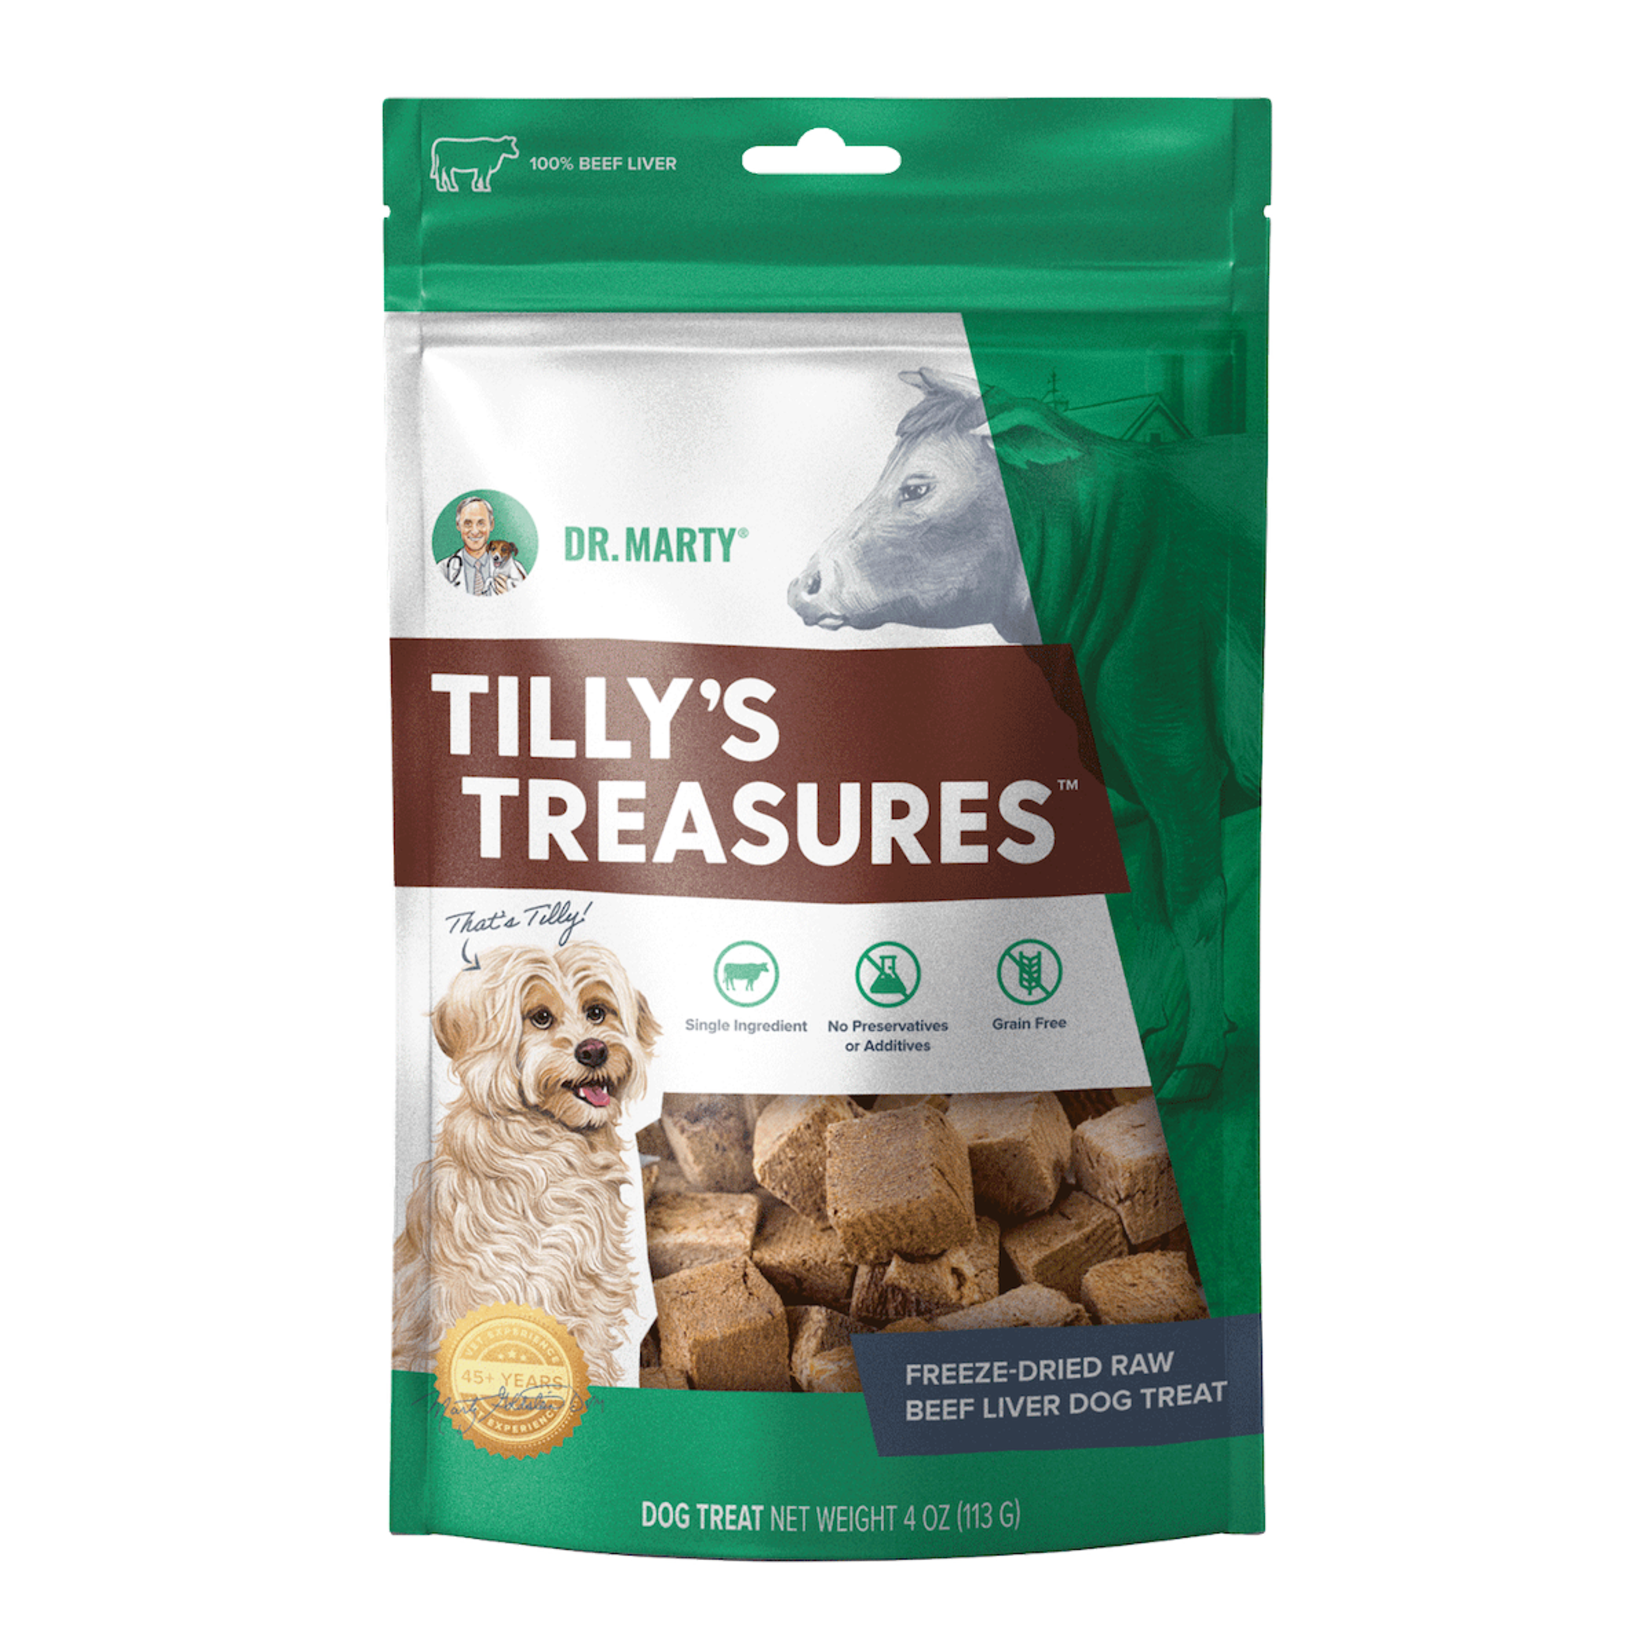 Dr. Marty Dr. Marty Tilly's Treasures Freeze-Dried Raw Beef Liver Dog Treat